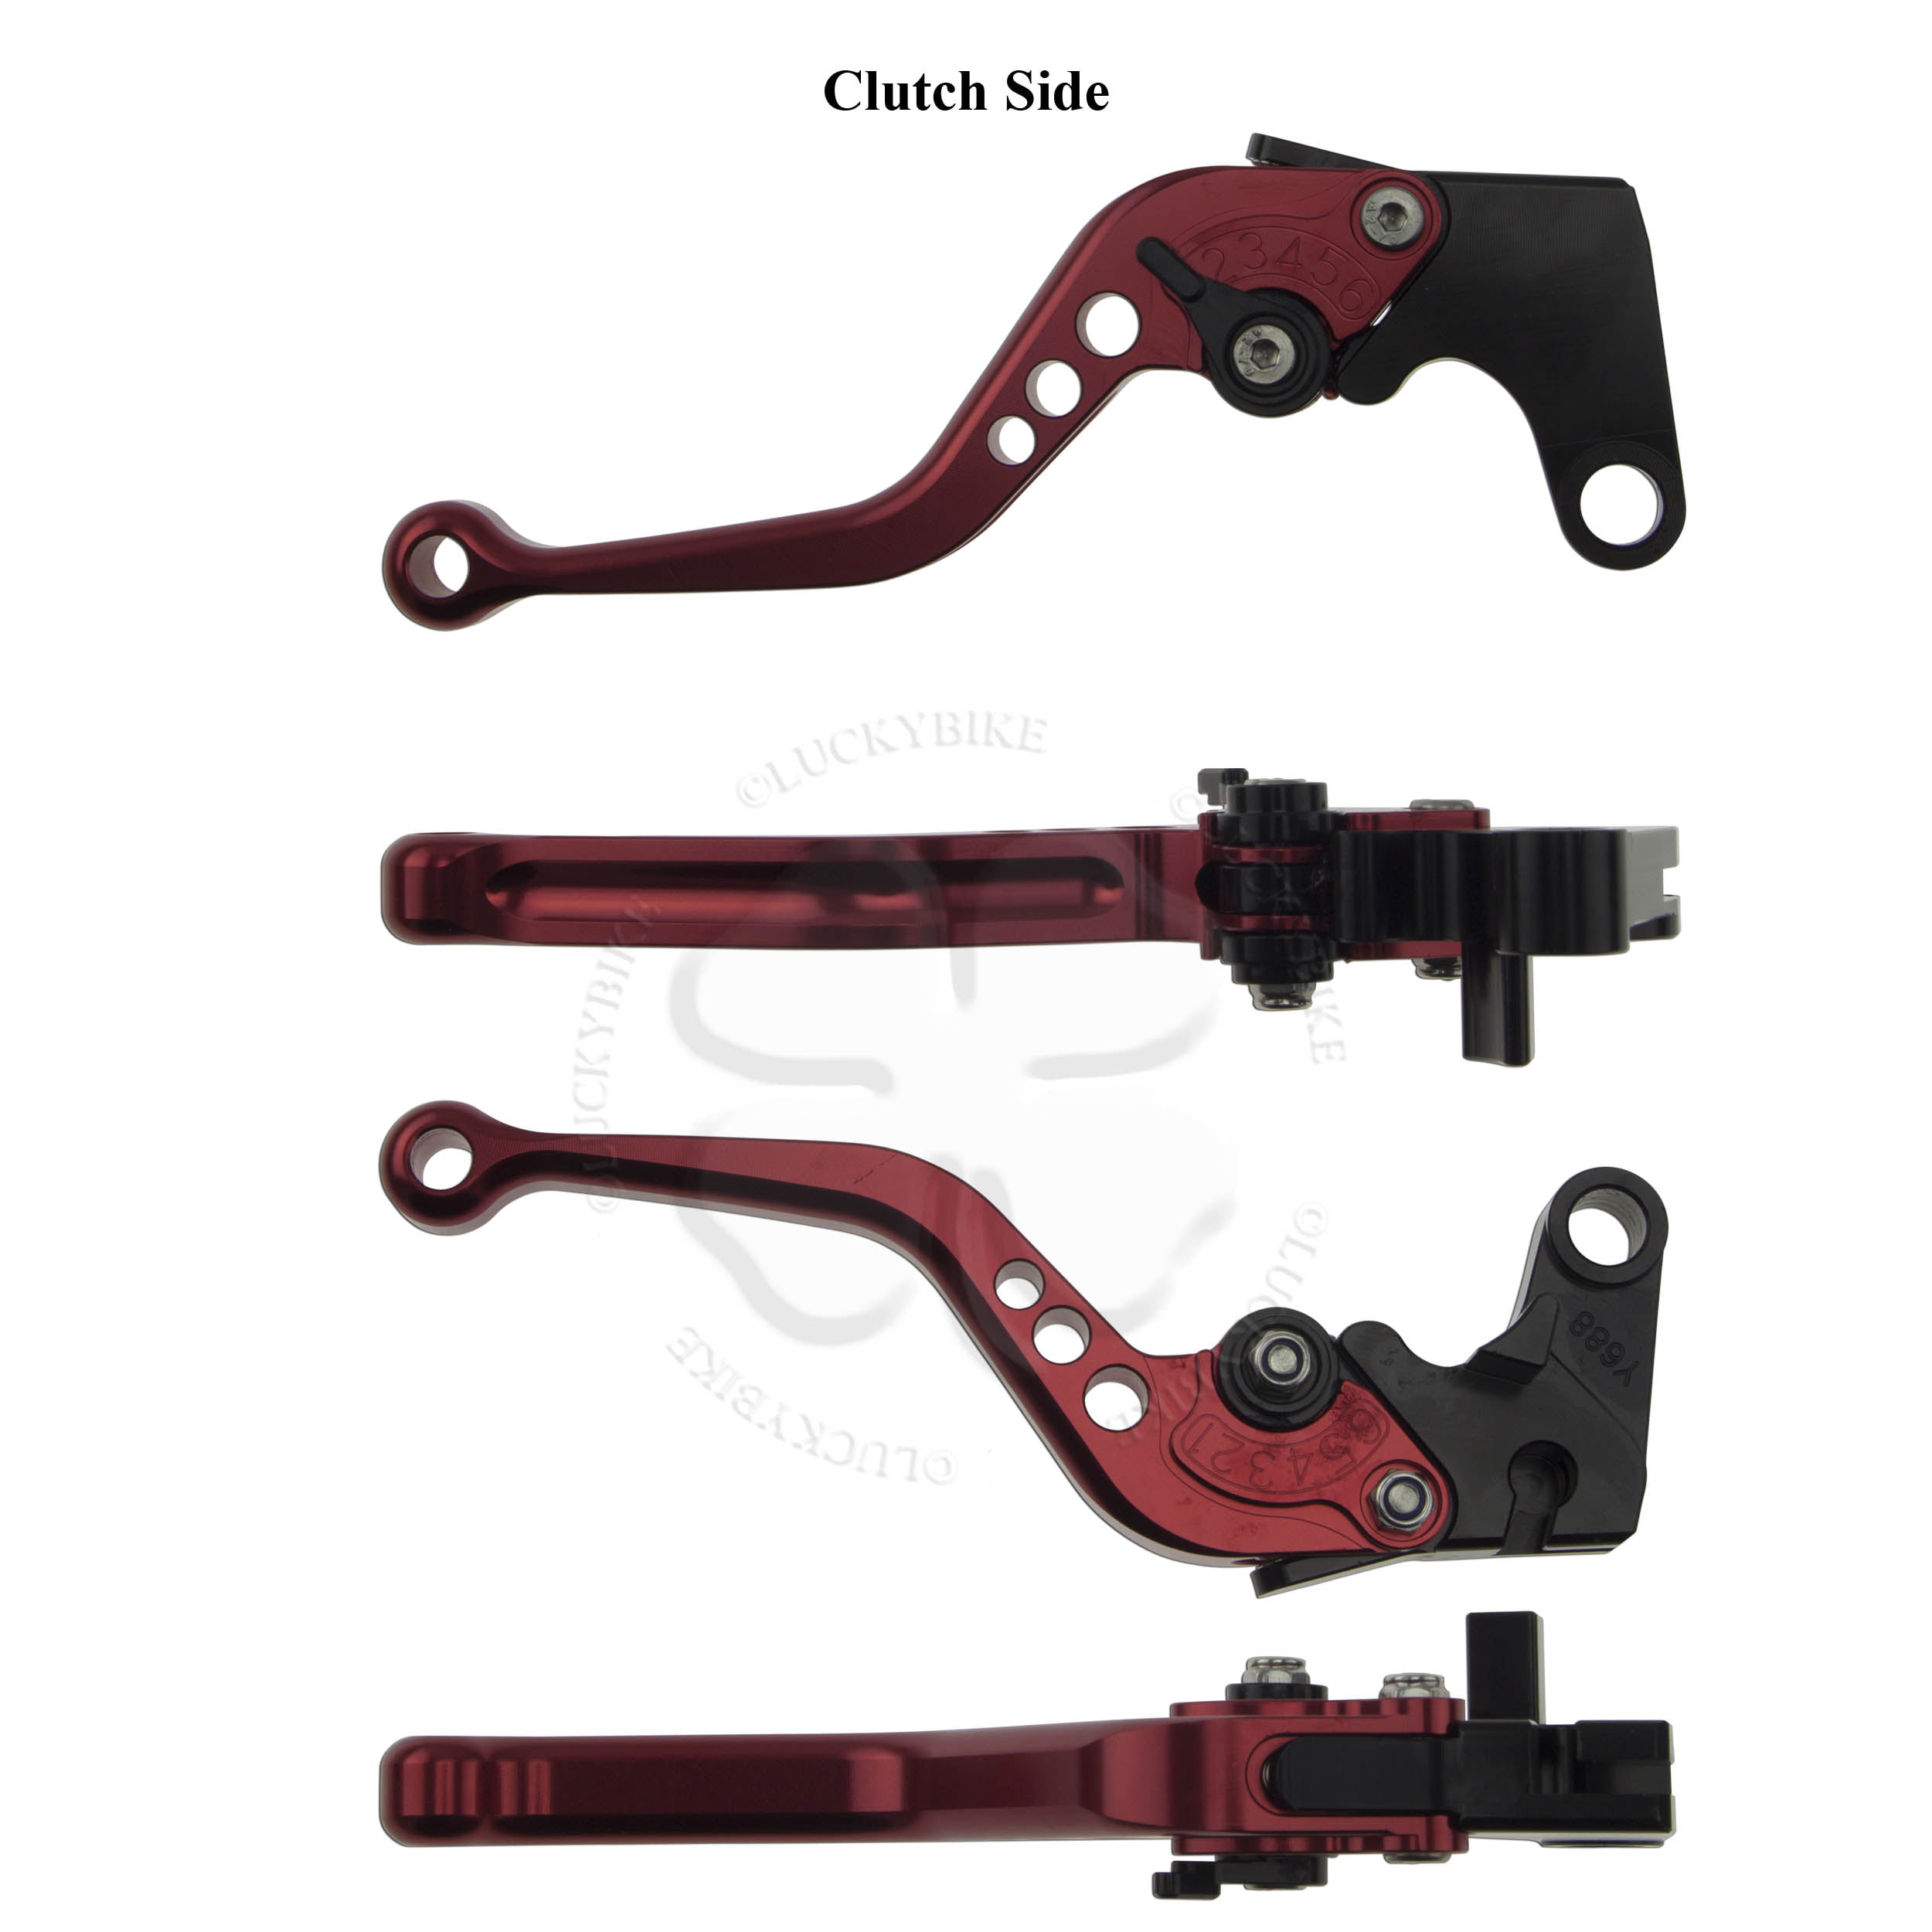 Short Clutch Brake Levers For Yamaha FZR600 FZR600R 1989-1999 Red CNC Adjustable